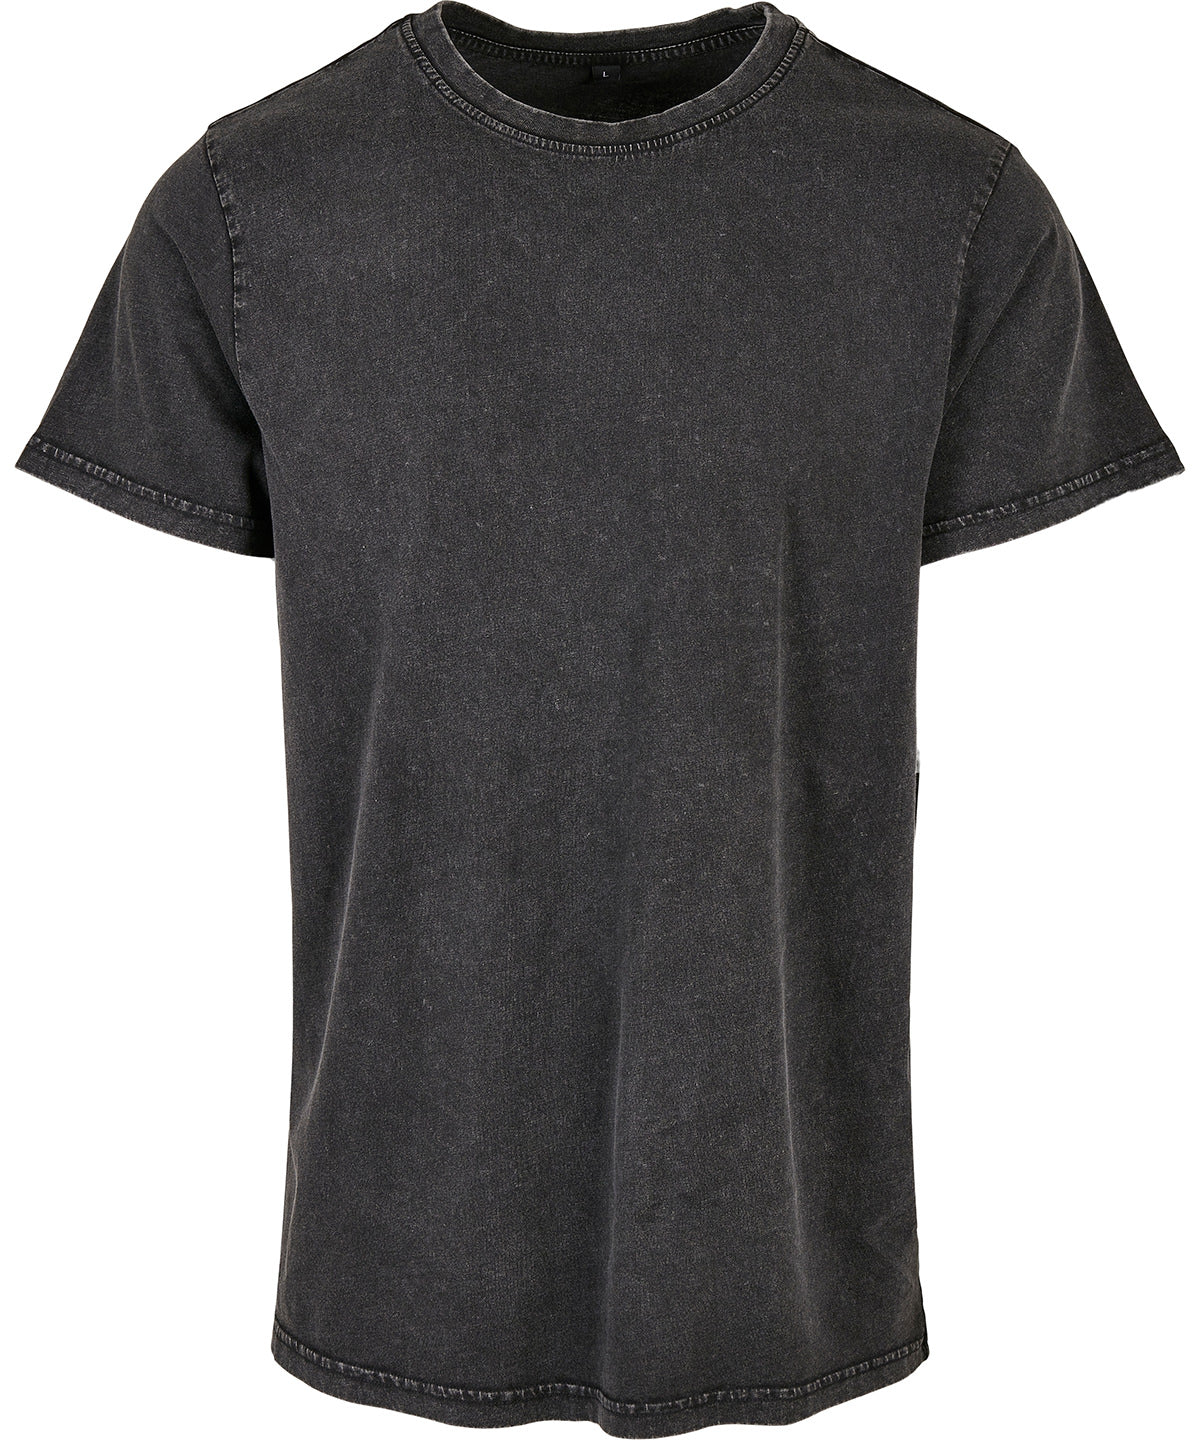 Build your BY190 Urban Brand Acid washed ribbed round neck tee 100% Cotton - COOZO